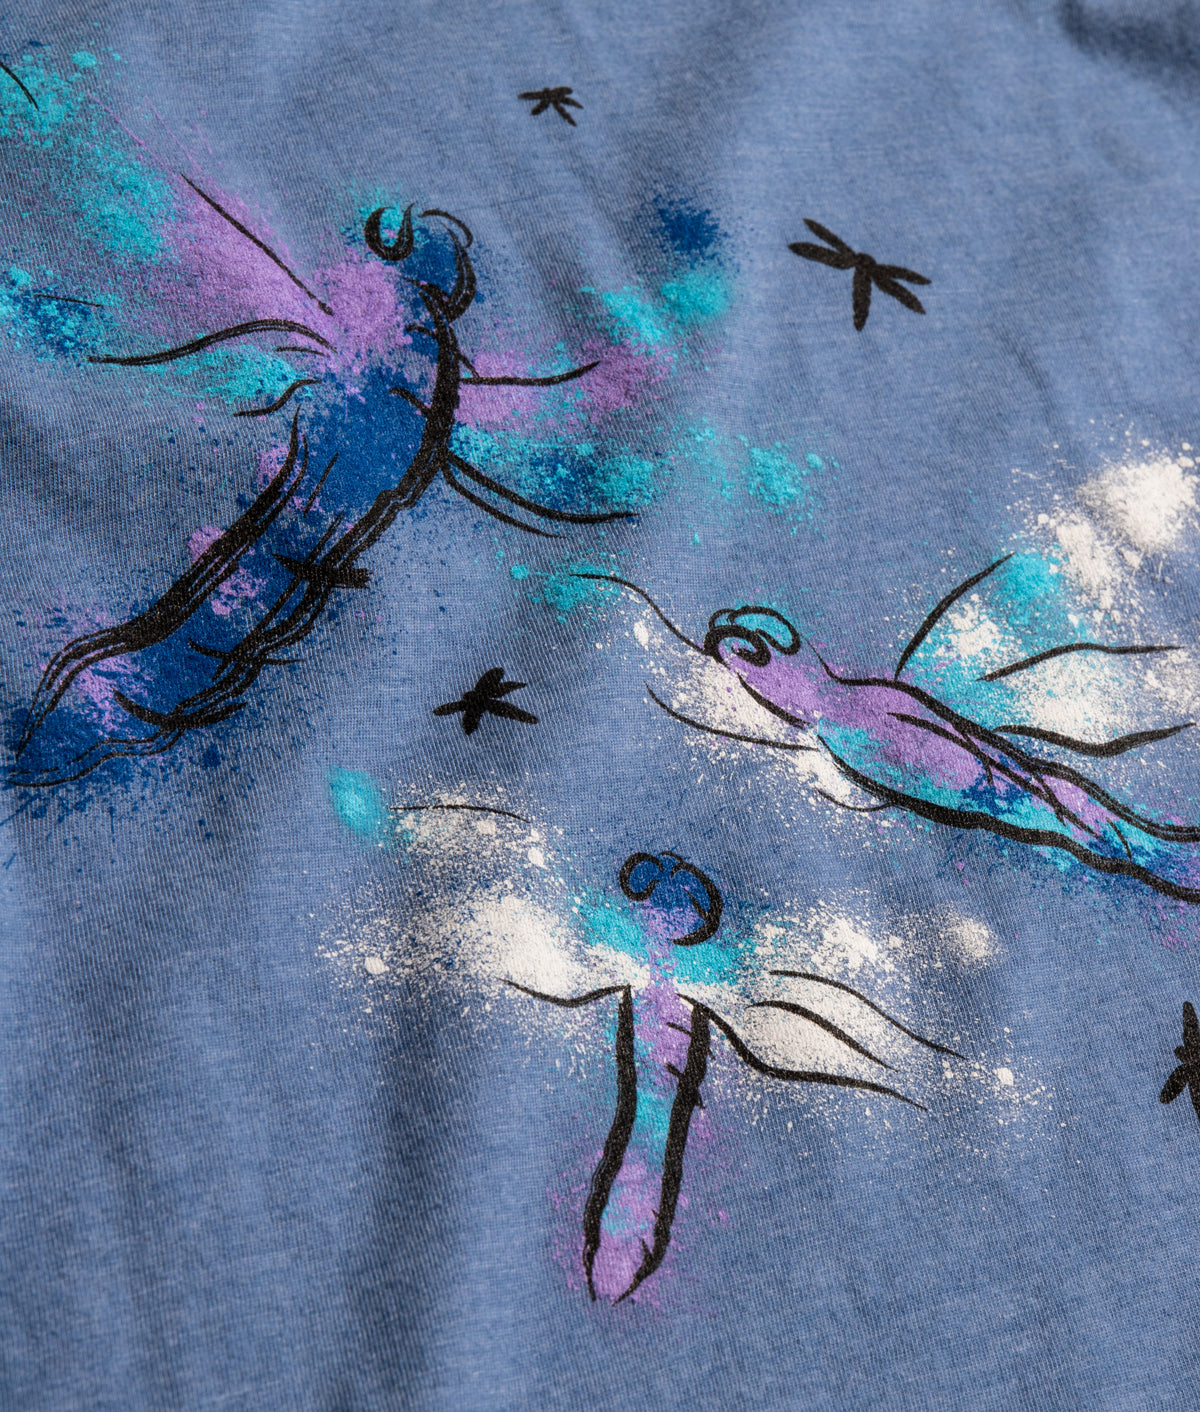 Dragonflies | Dragonfly Nature Art Insect Bug Cute Gift V-neck T-shirt for Women